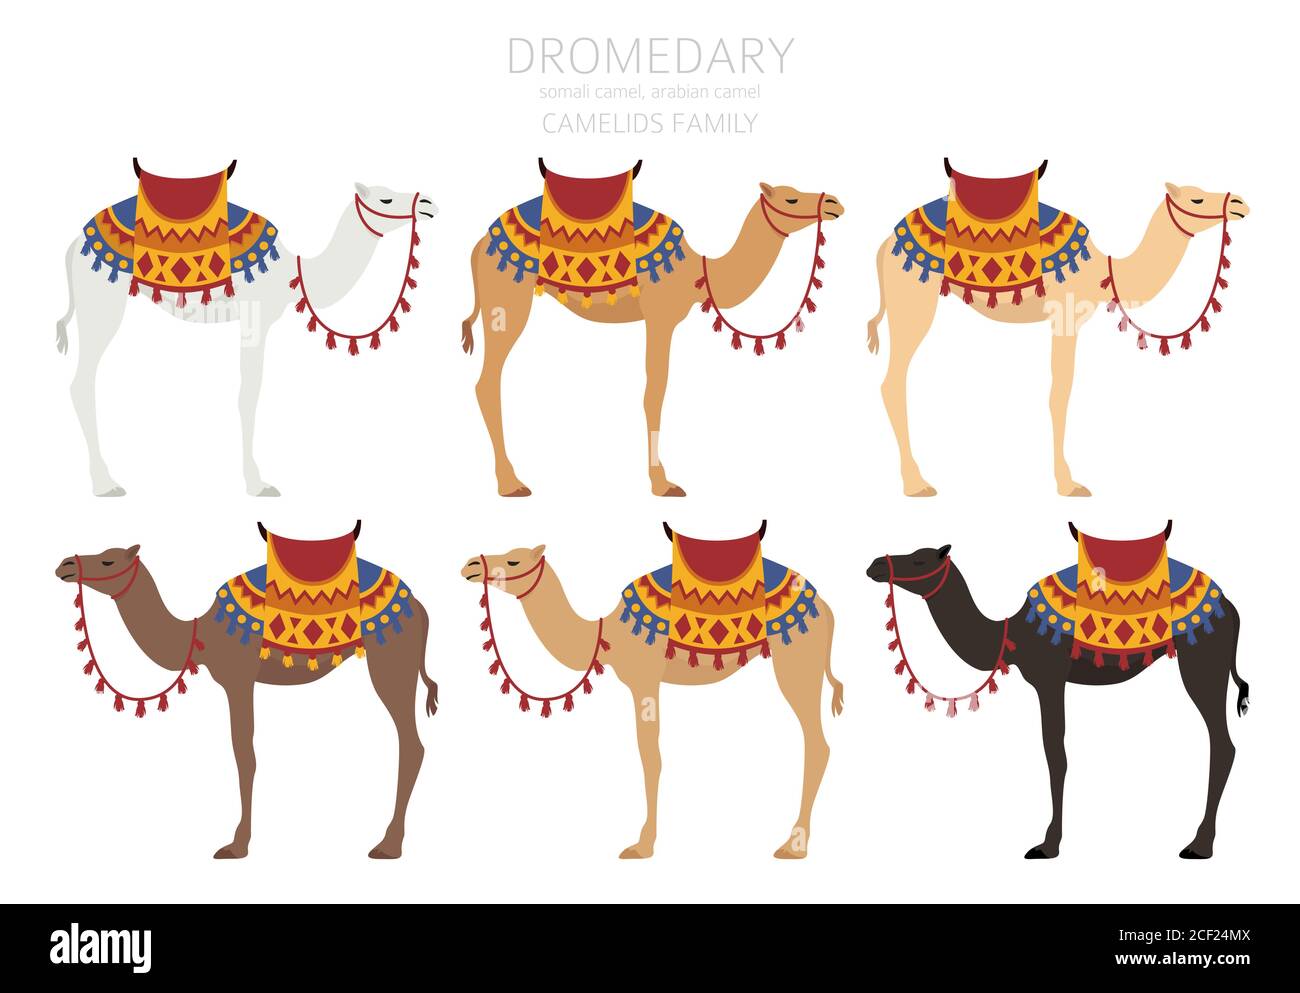 Camelids family collection. Dromedary camel infographic design. Vector illustration Stock Vector